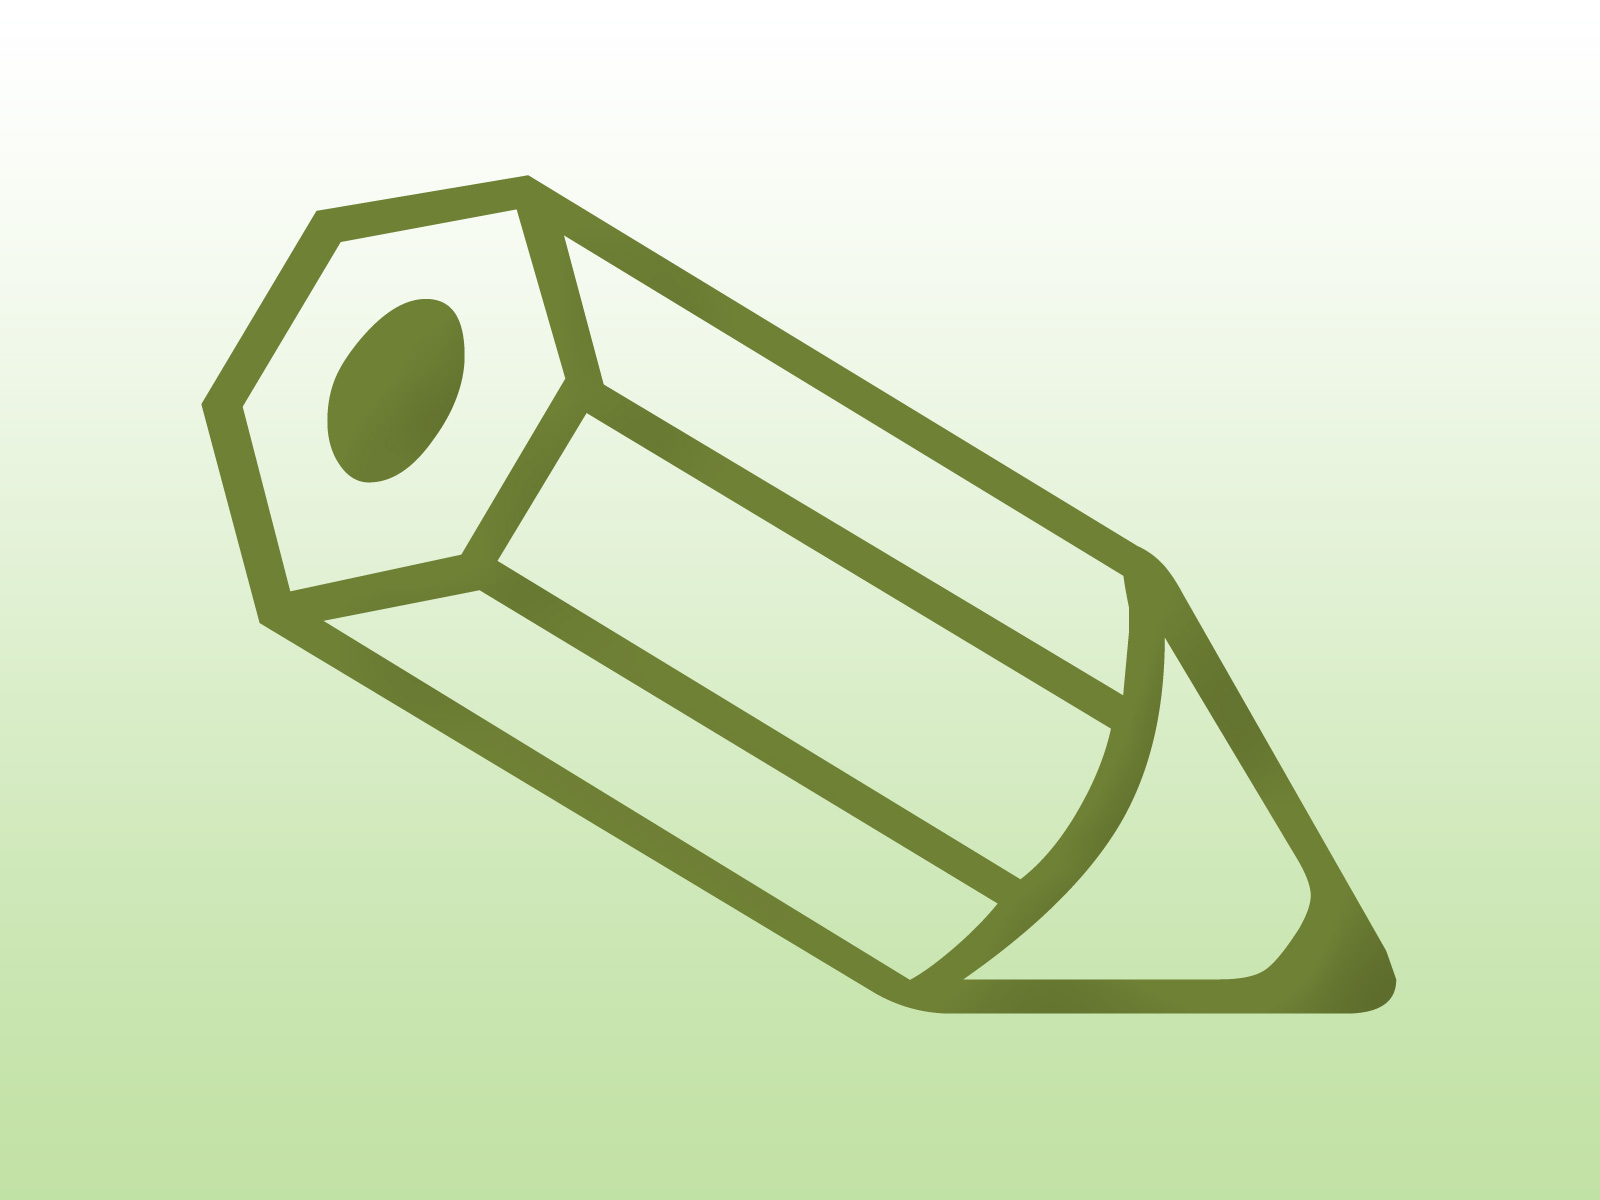 Pencil icon on green